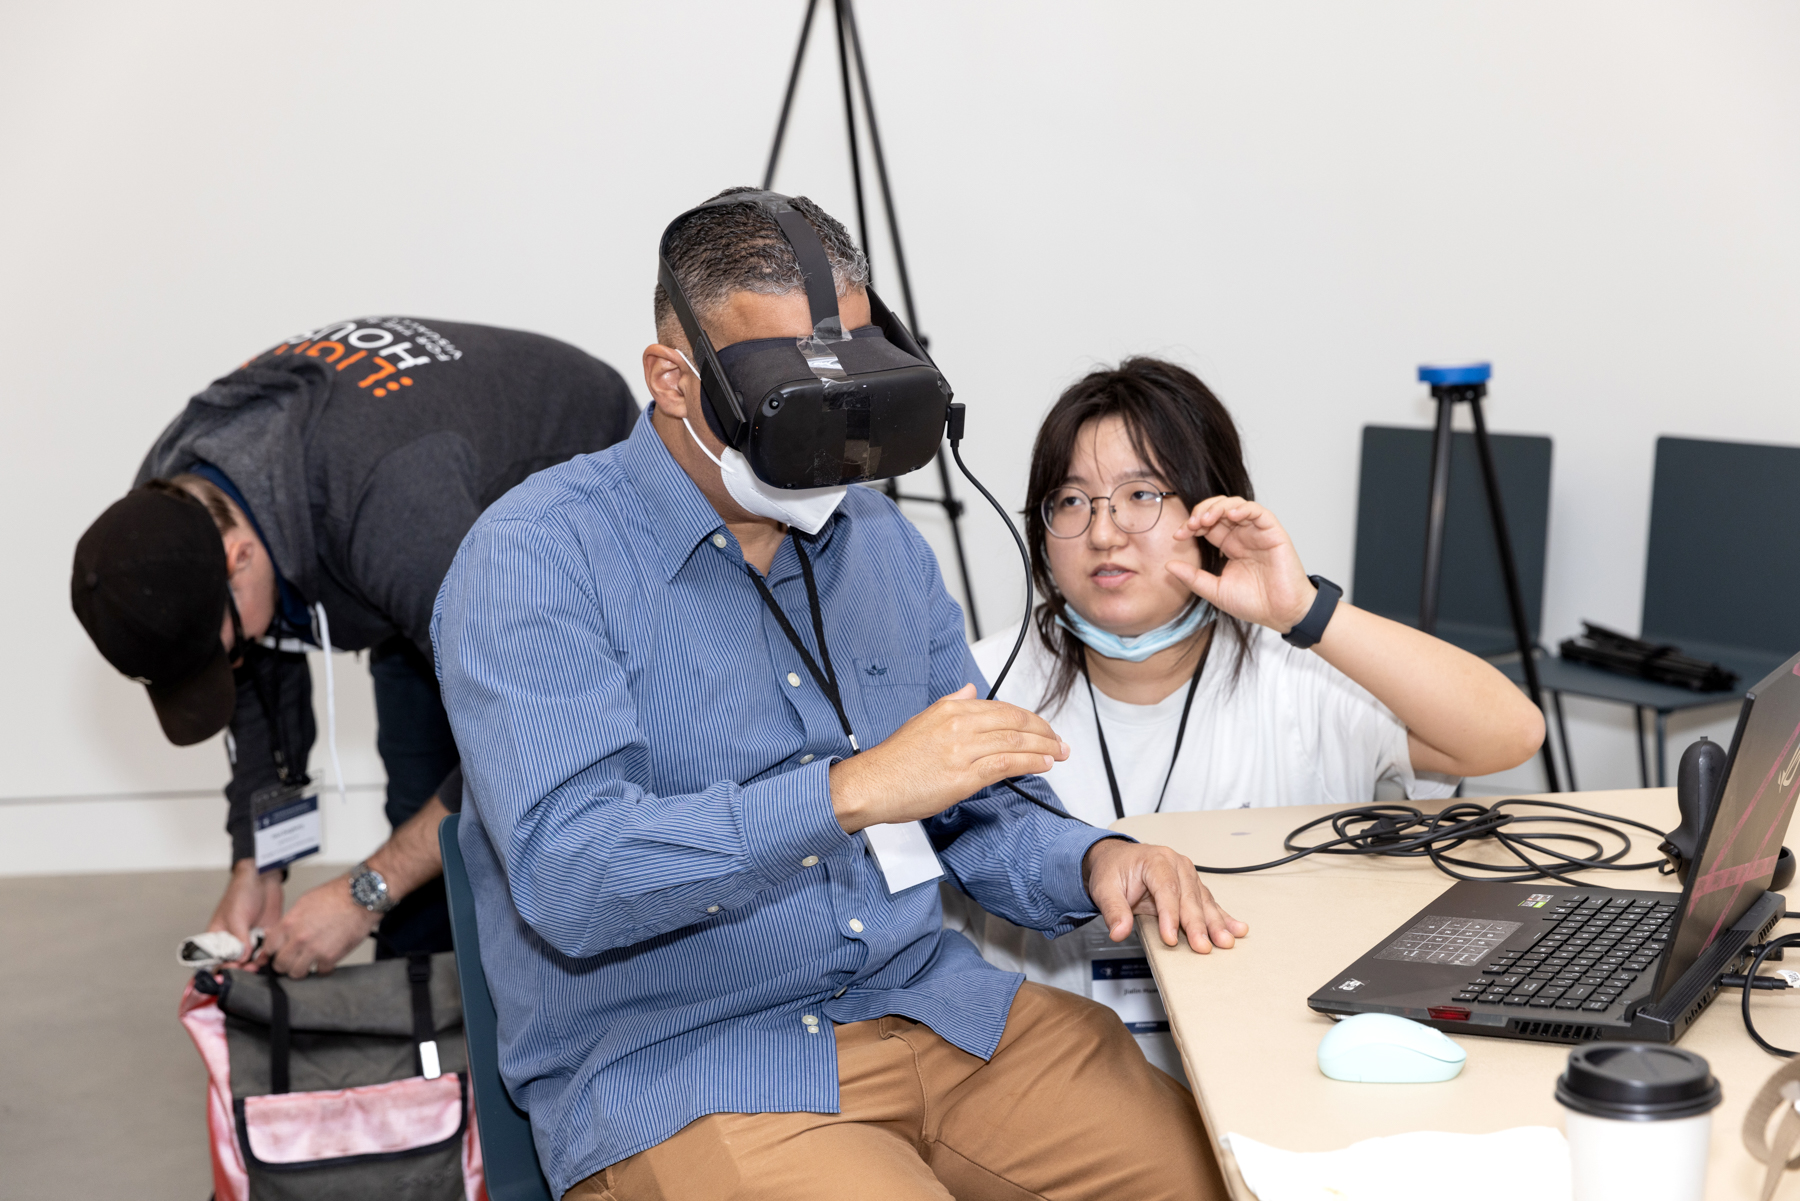 Jeffrey Colon tries a VR soundscape experience, assisted by a volunteer